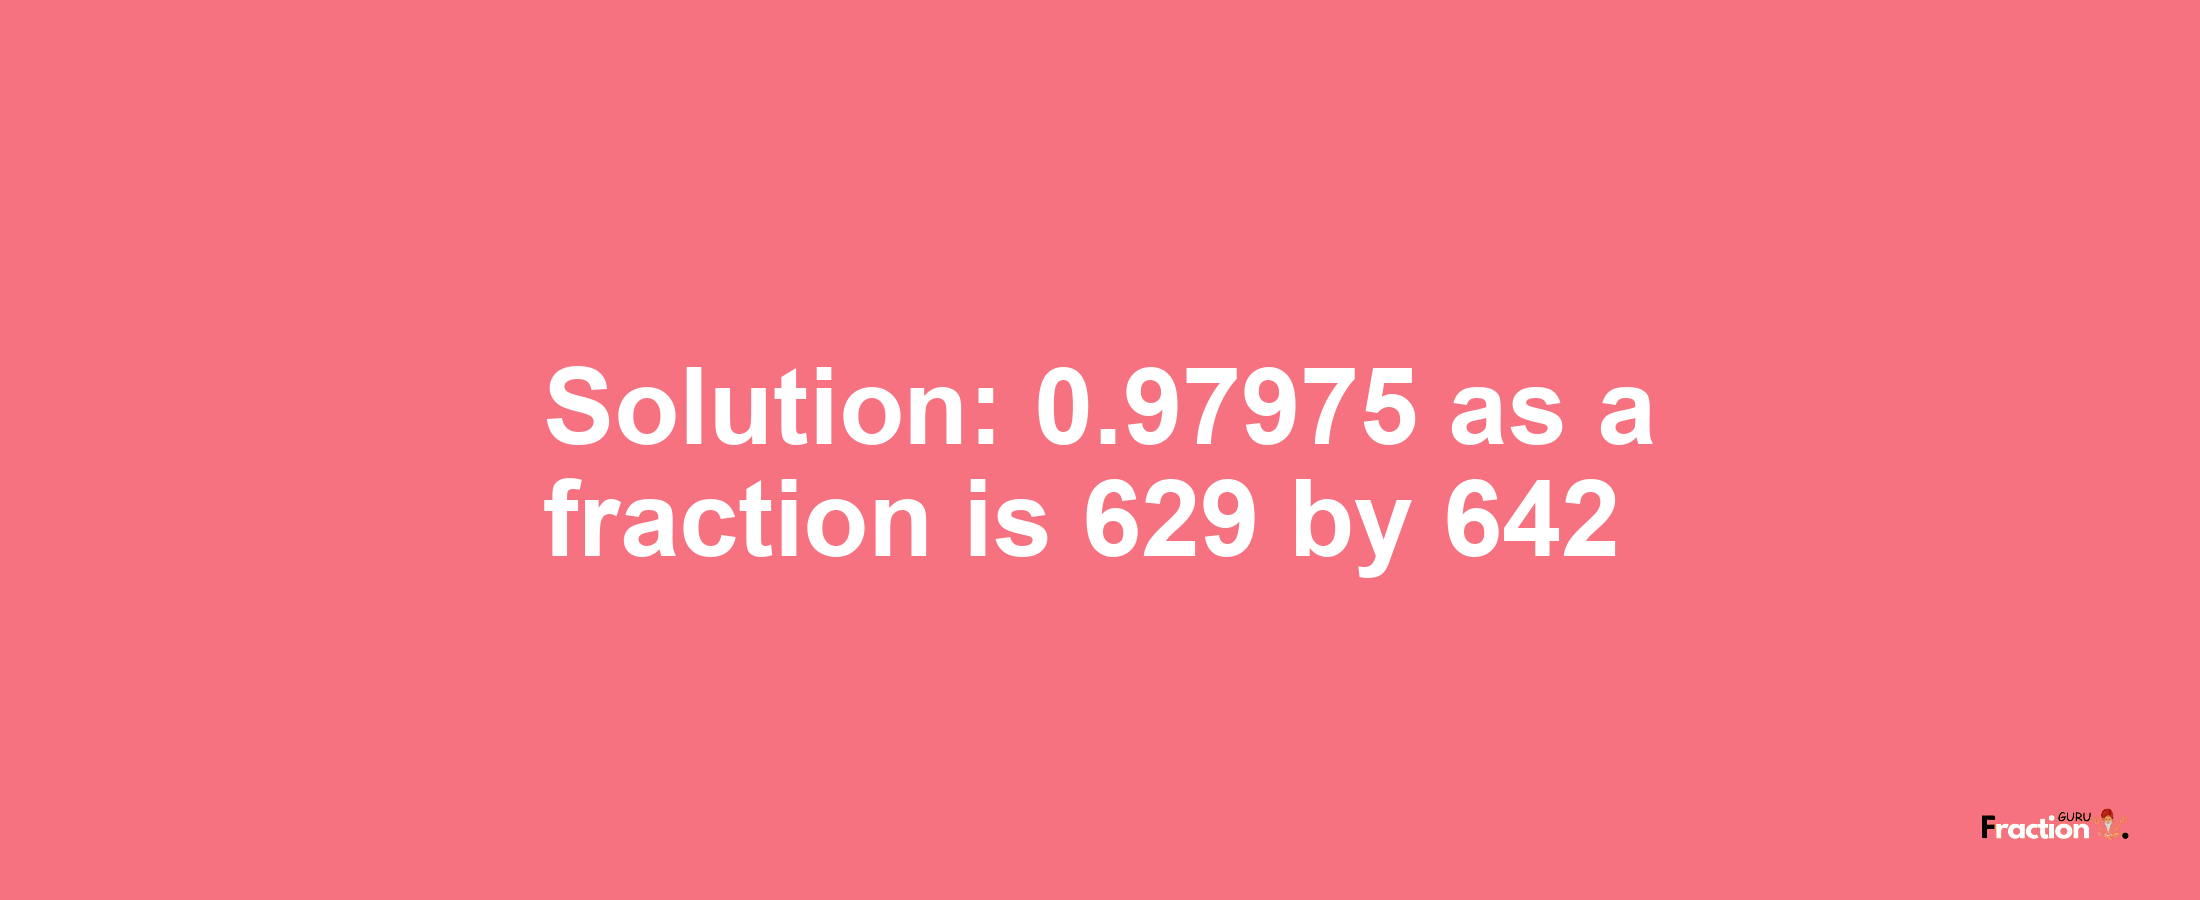 Solution:0.97975 as a fraction is 629/642